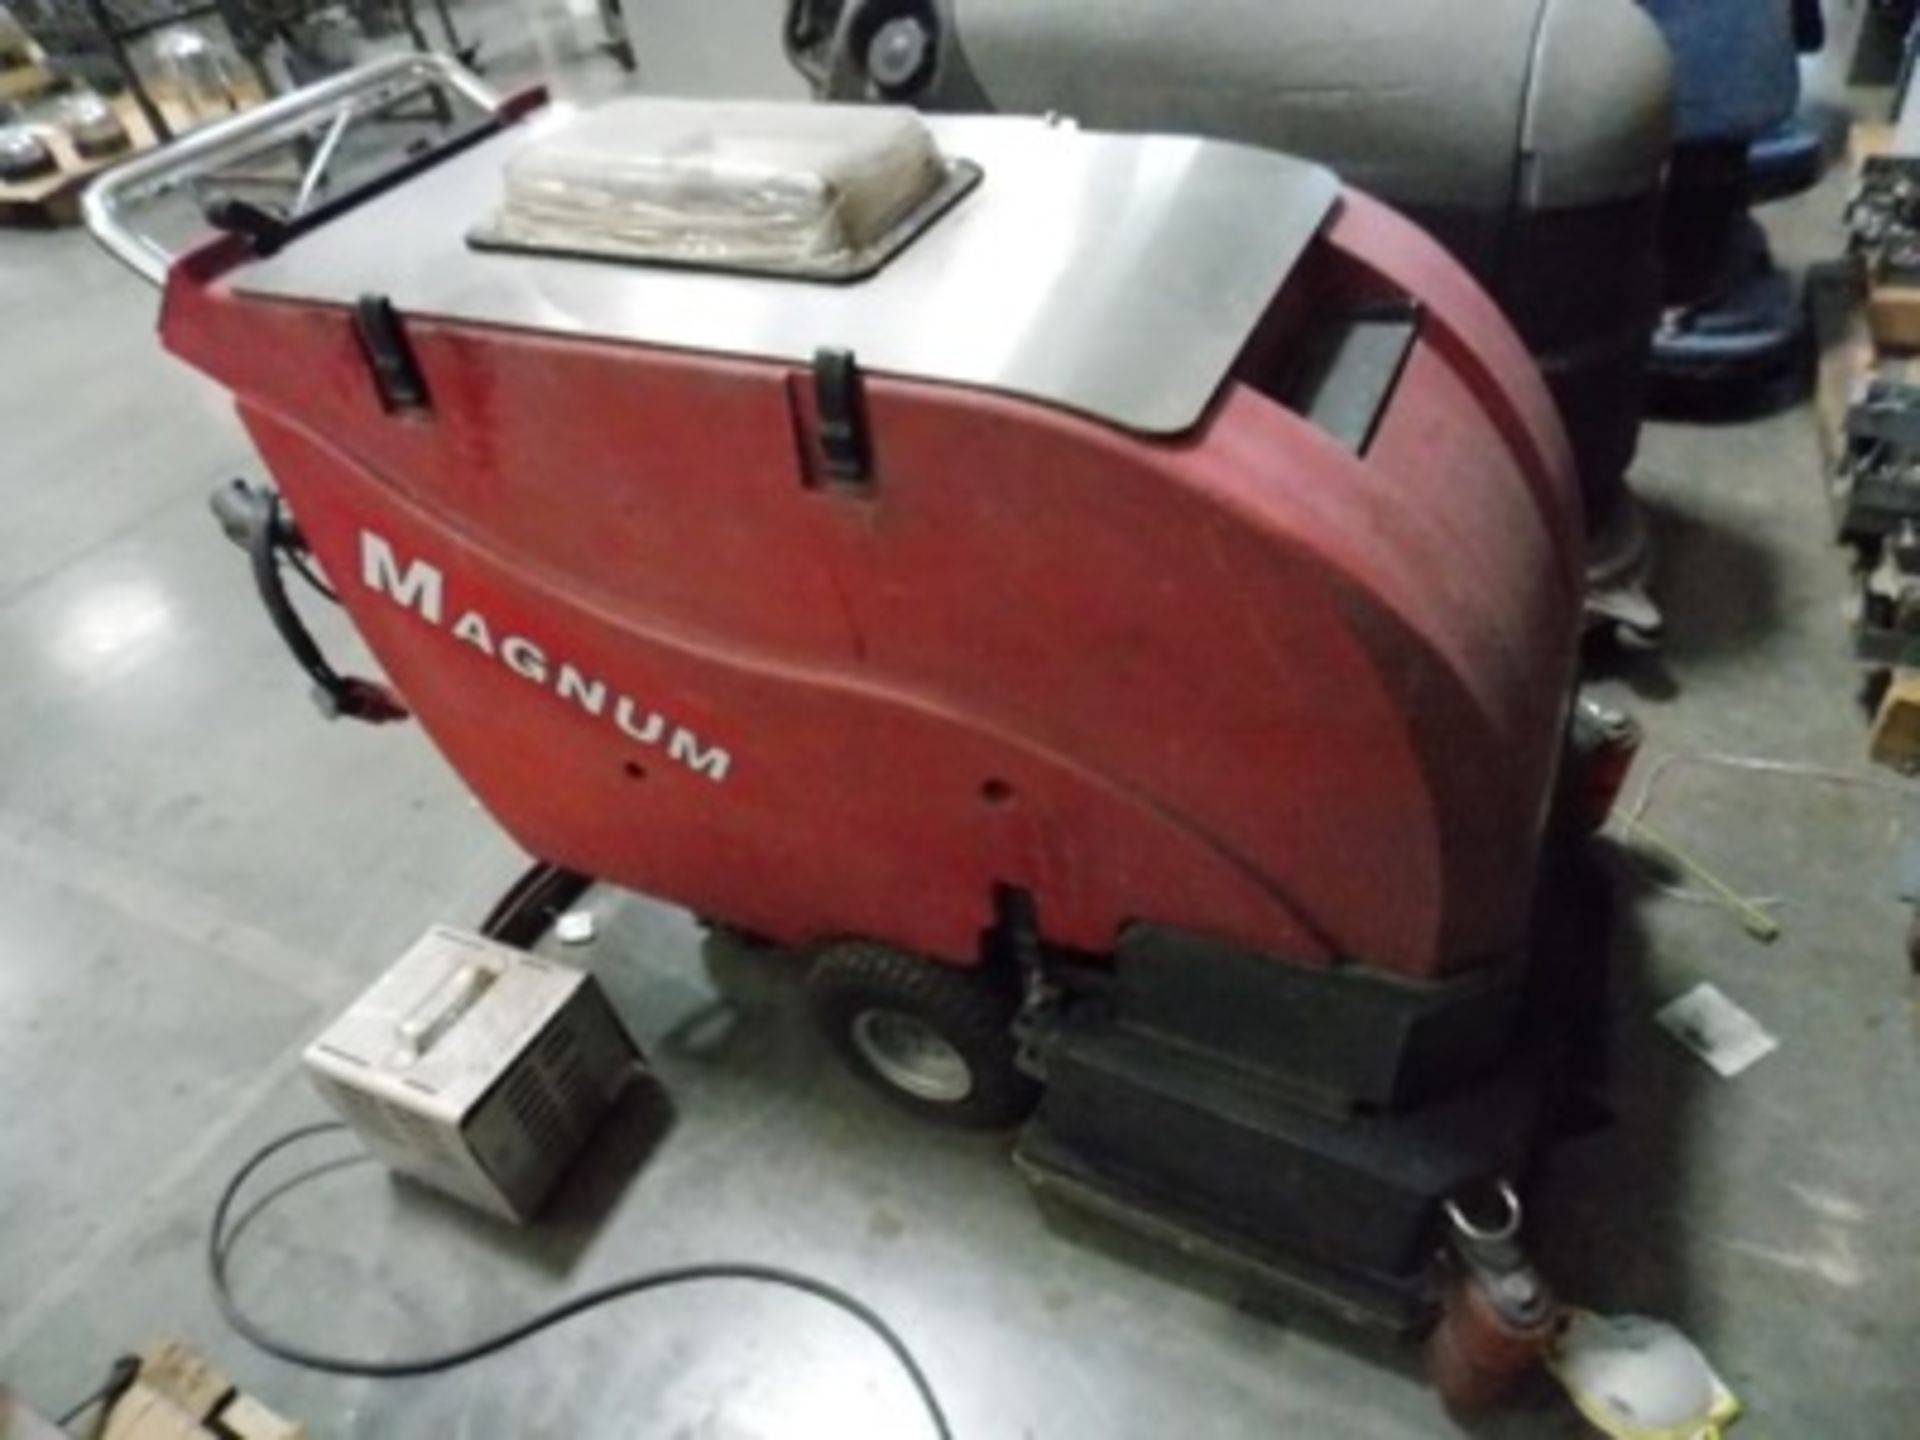 Magnum Floor Scrubber w/ Charger S/N 47112 - Image 3 of 3